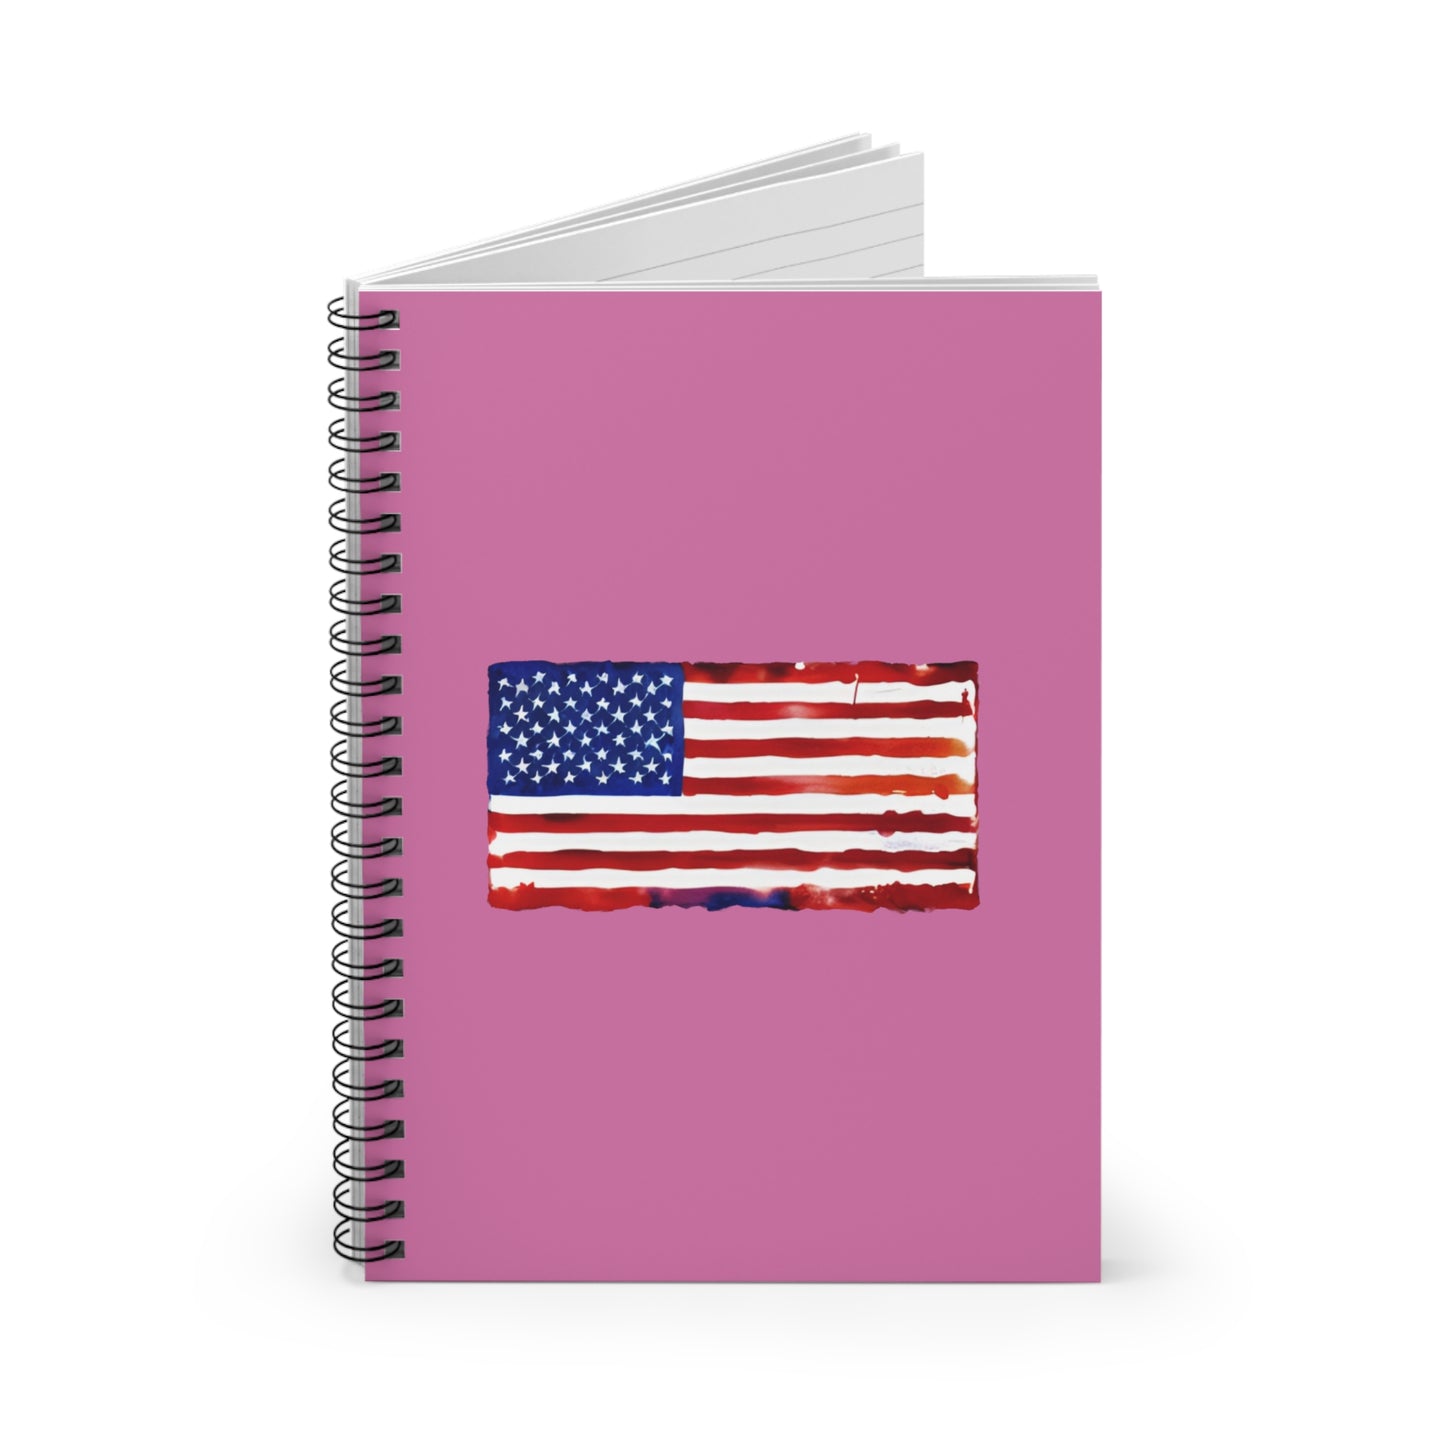 American Flag Watercolor, Spiral Notebook, Ruled Line, Pink Cover